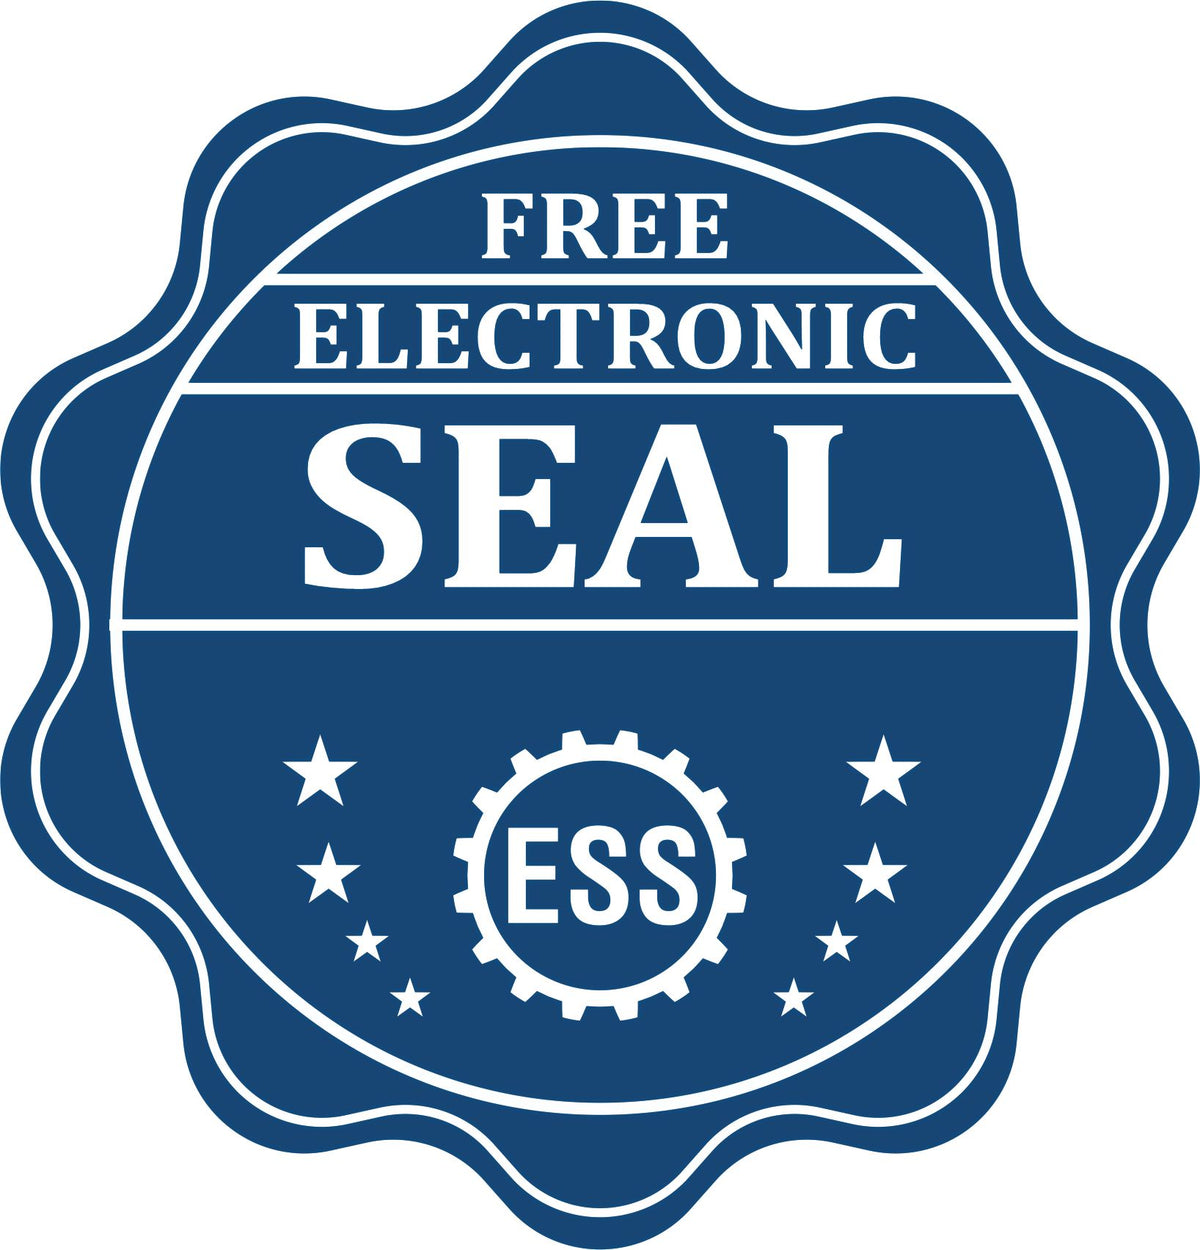 A badge showing a free electronic seal for the Slim Pre-Inked Hawaii Professional Geologist Seal Stamp with stars and the ESS gear on the emblem.